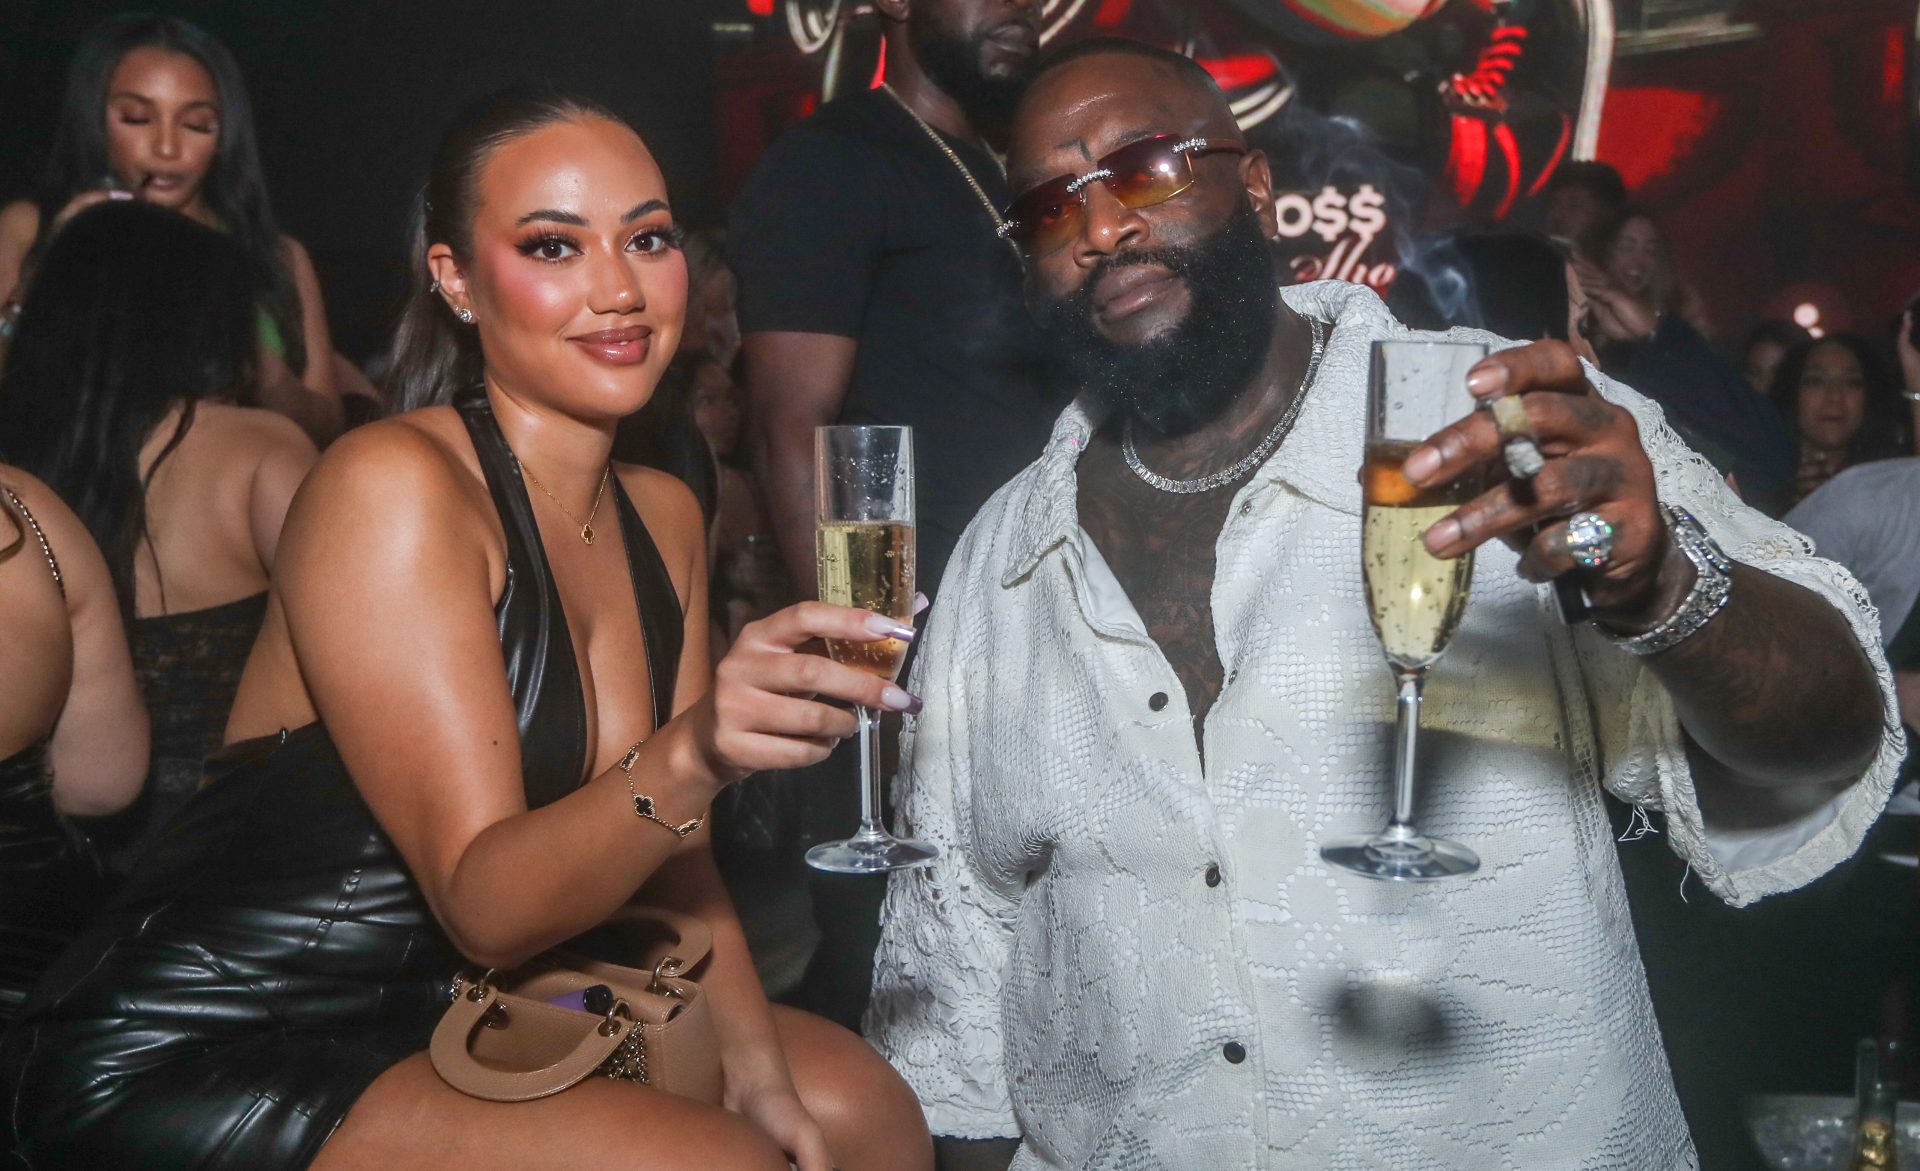 New Boo? Rick Ross' Name Seemingly Pictured On Woman's Neck